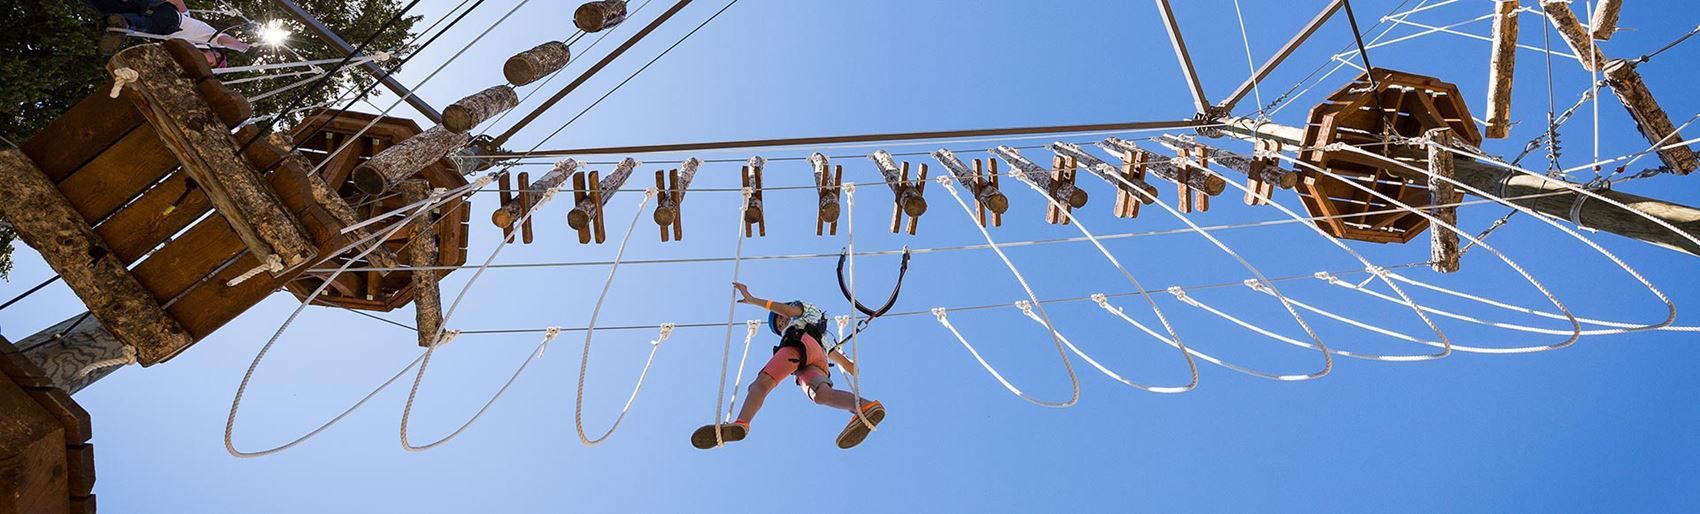 Picture of The Ropes Course